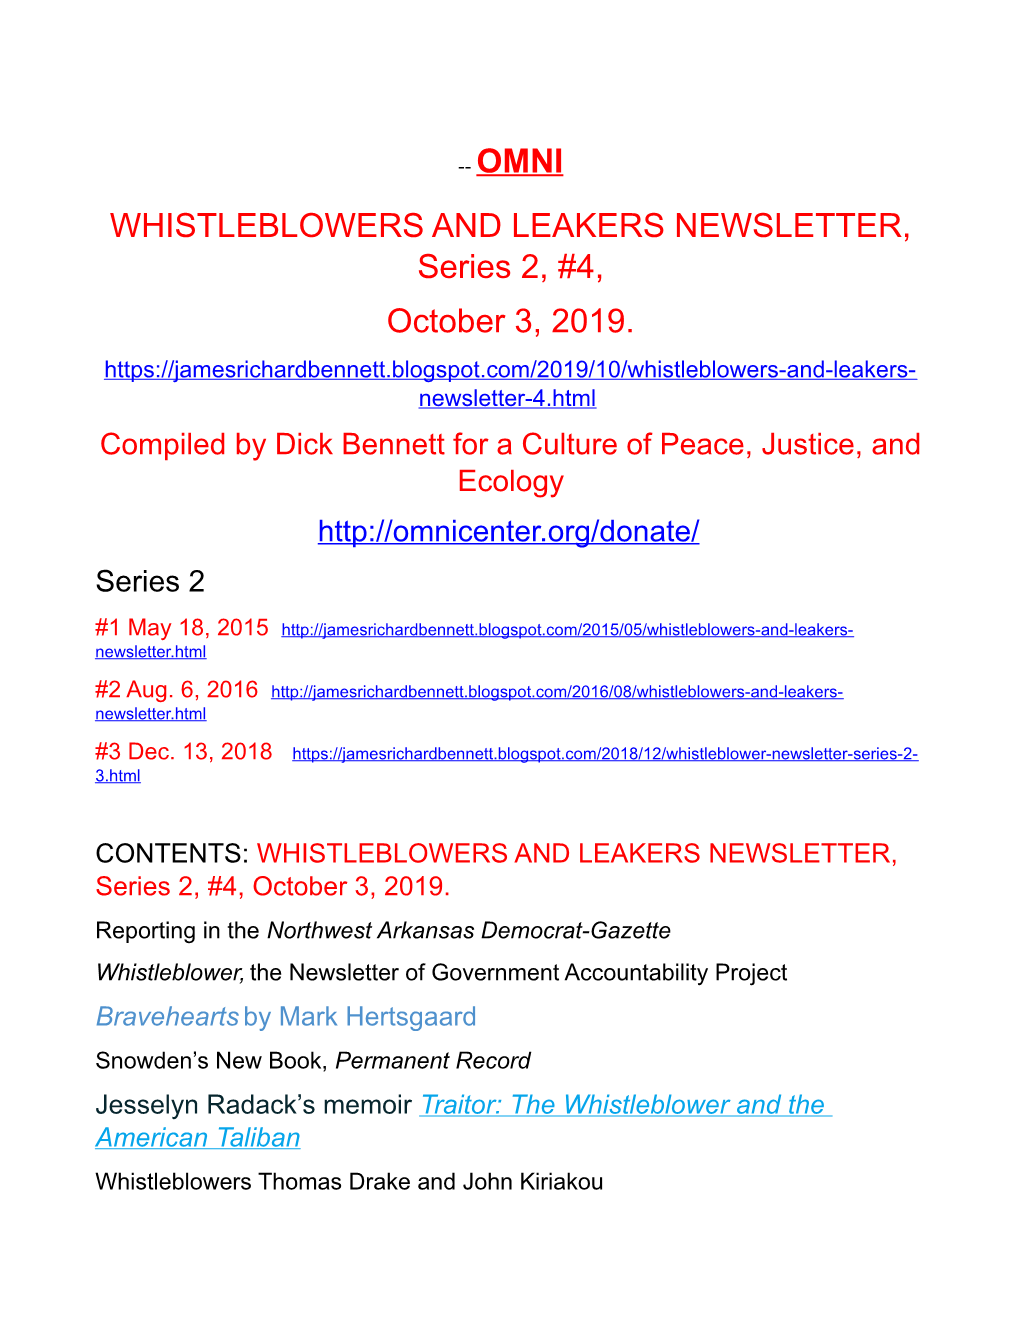 WHISTLEBLOWERS and LEAKERS NEWSLETTER, Series 2, #4, October 3, 2019